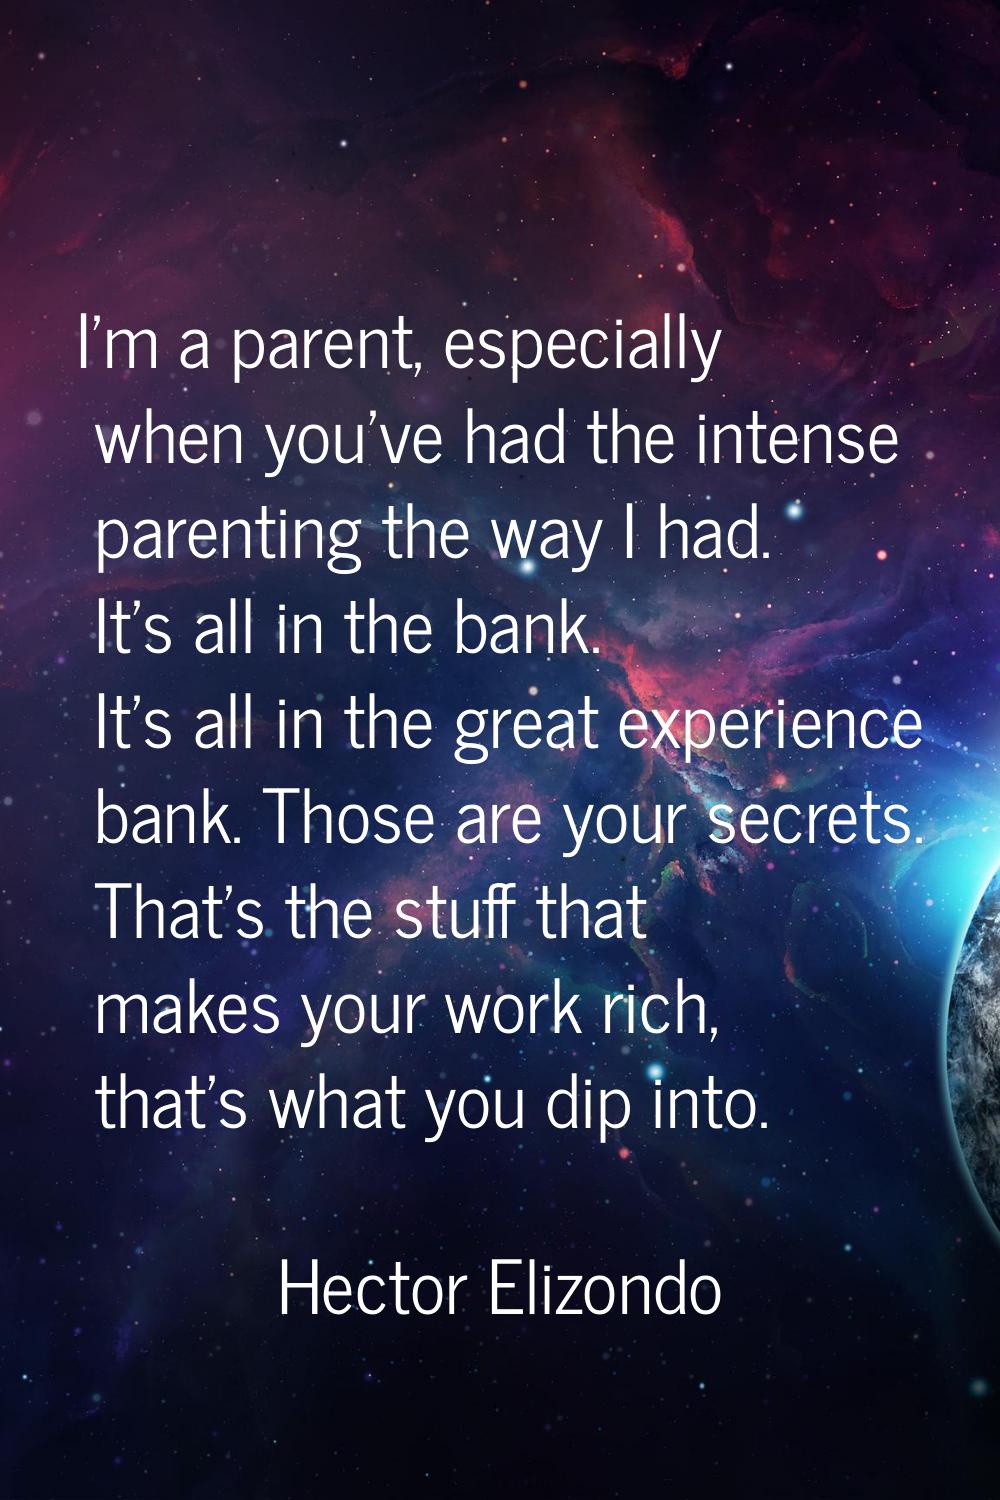 I'm a parent, especially when you've had the intense parenting the way I had. It's all in the bank.